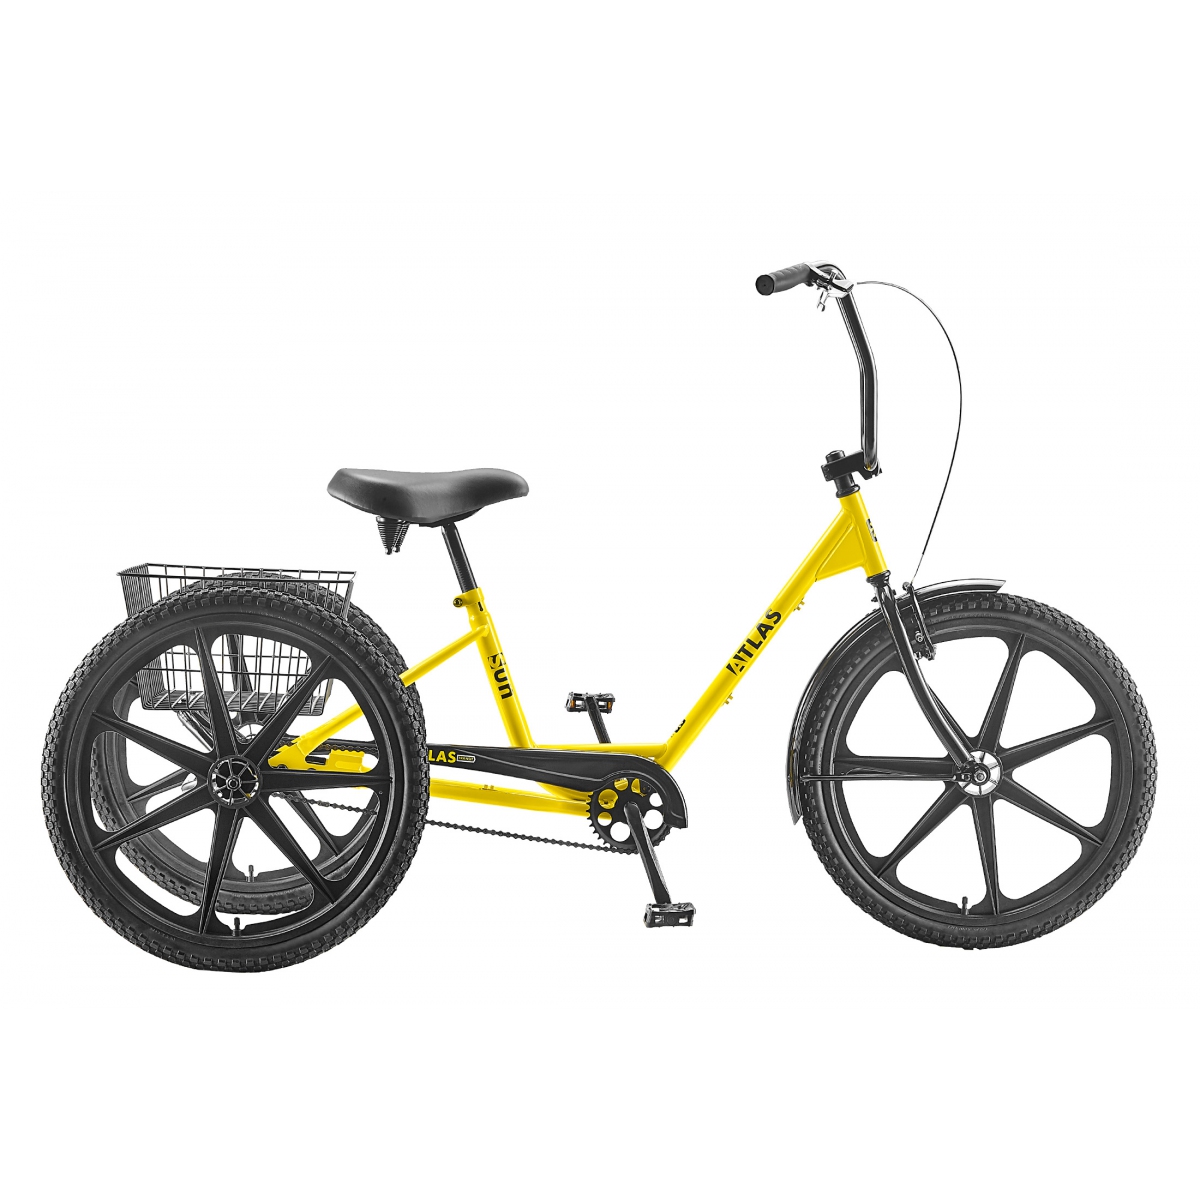 heavy duty adult tricycle